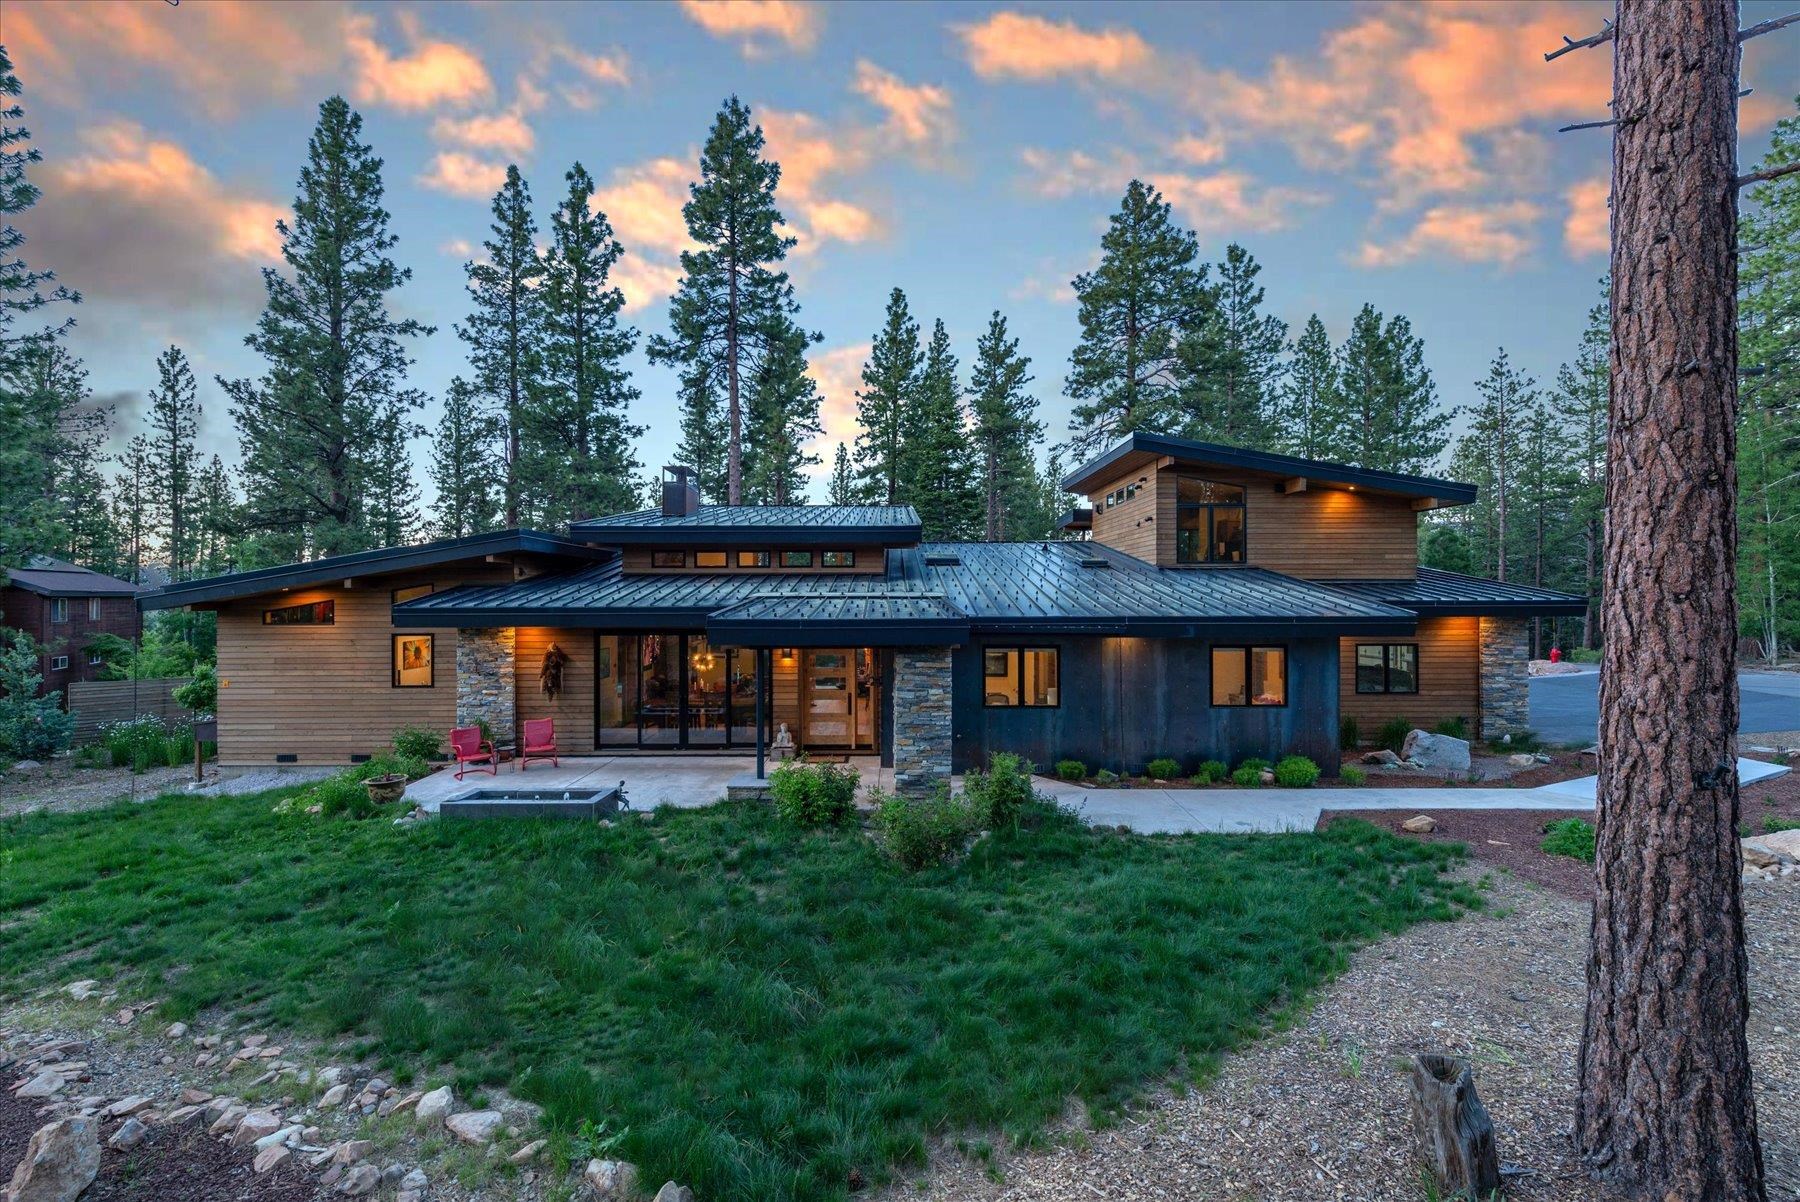 Image for 15556 Lois Lane, Truckee, CA 96161-1273